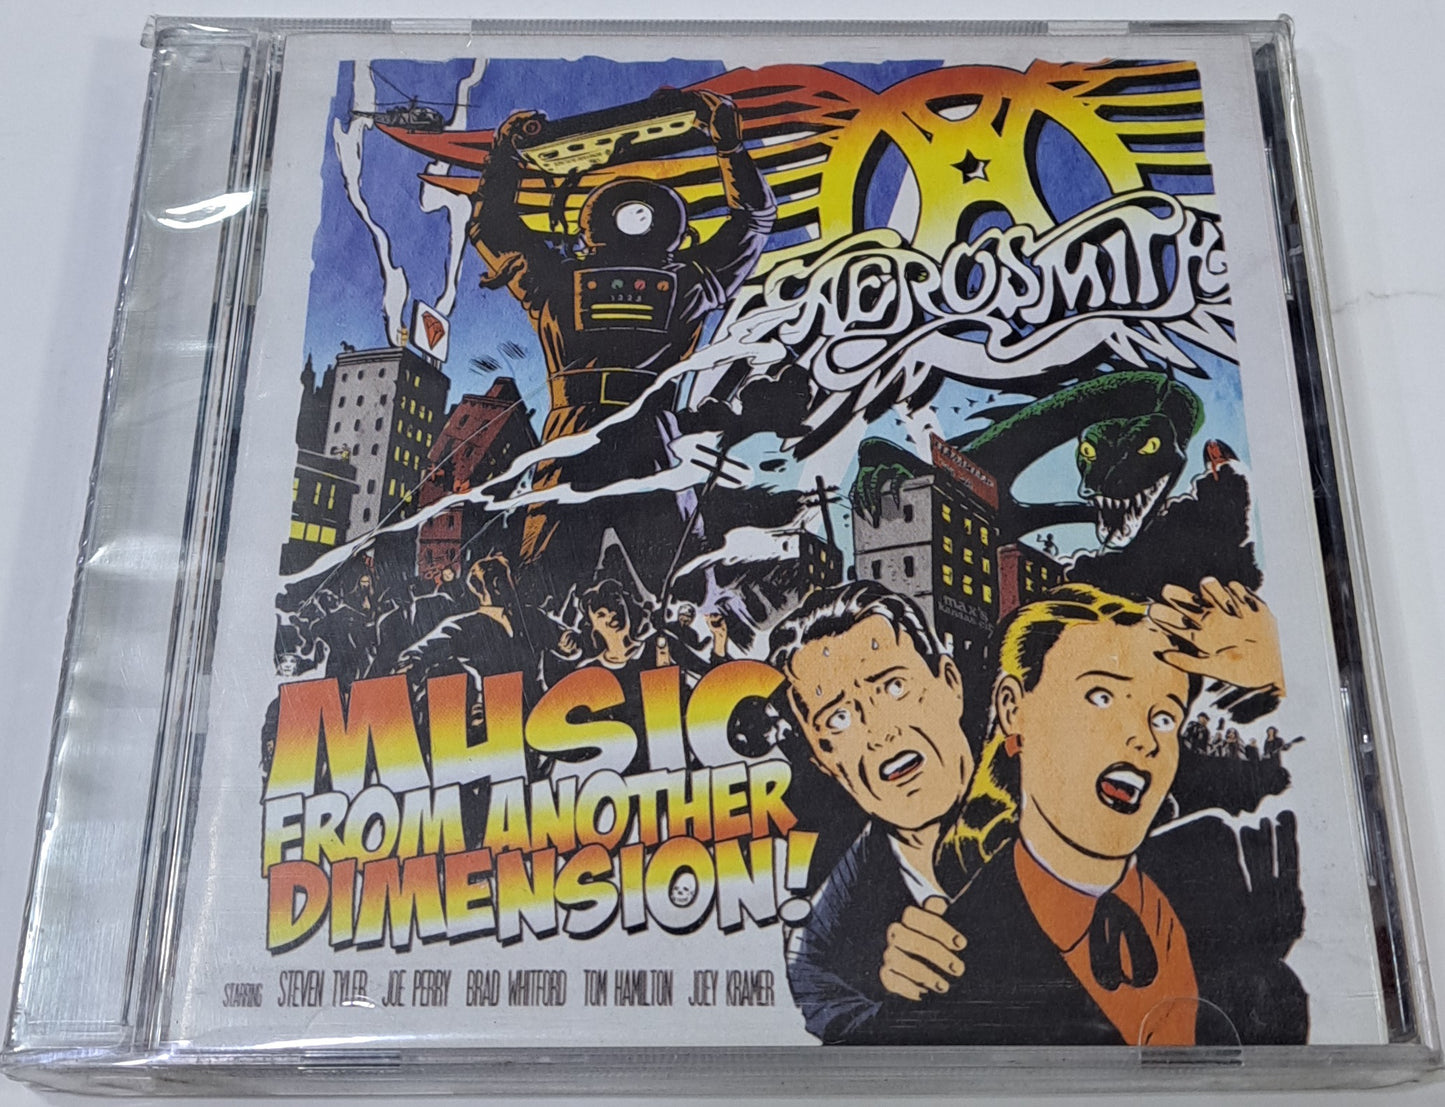 AEROSMITH - MUSIC FROM ANOTHER DIMENSION CD